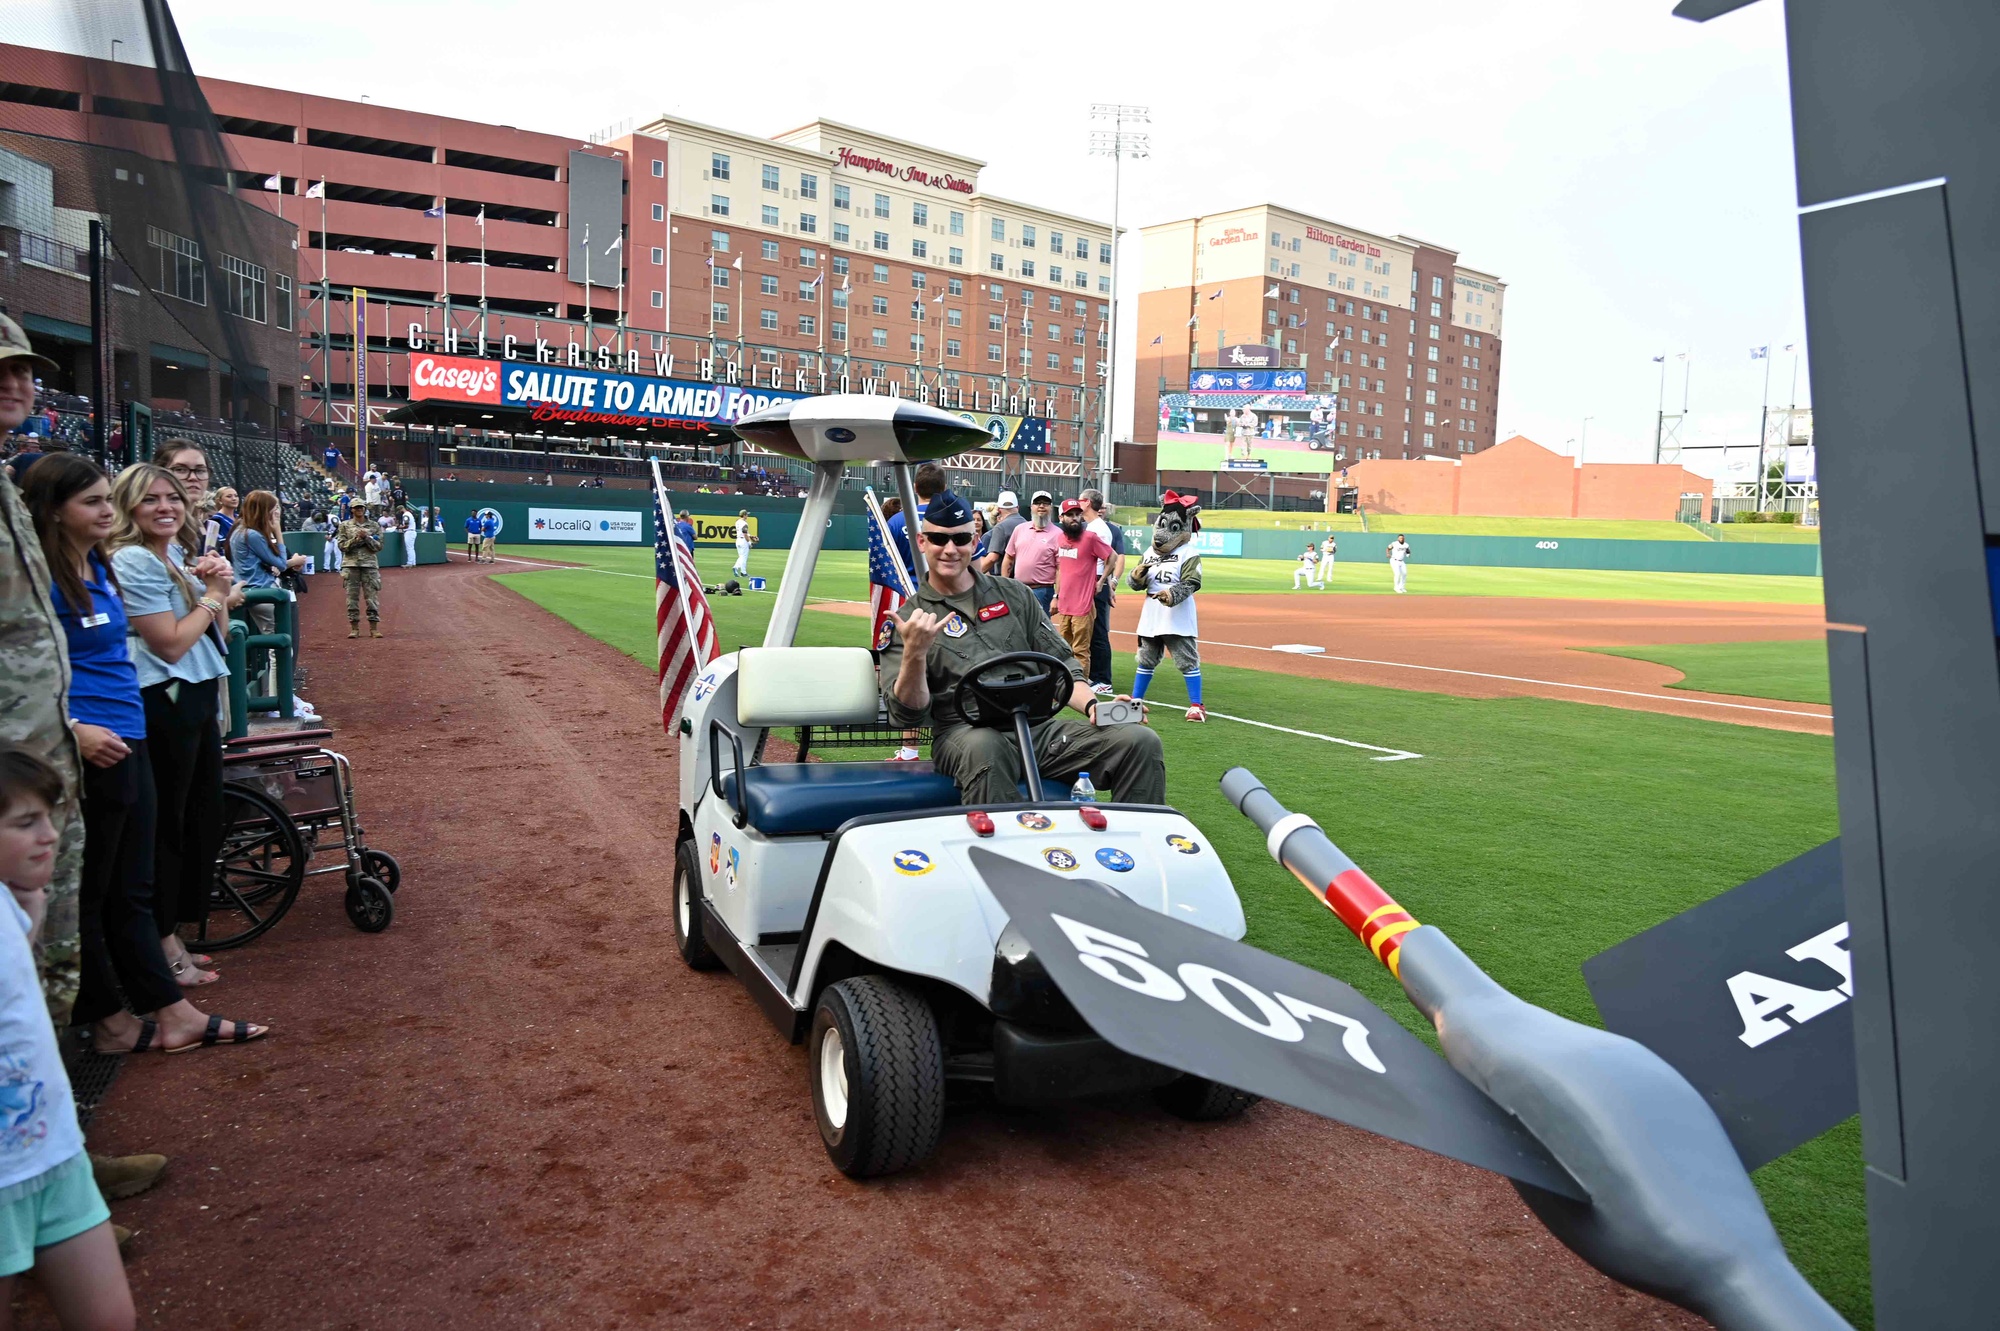 DVIDS - Images - Team Tinker stars at OKC Dodgers Salute to Armed Forces  game [Image 5 of 5]